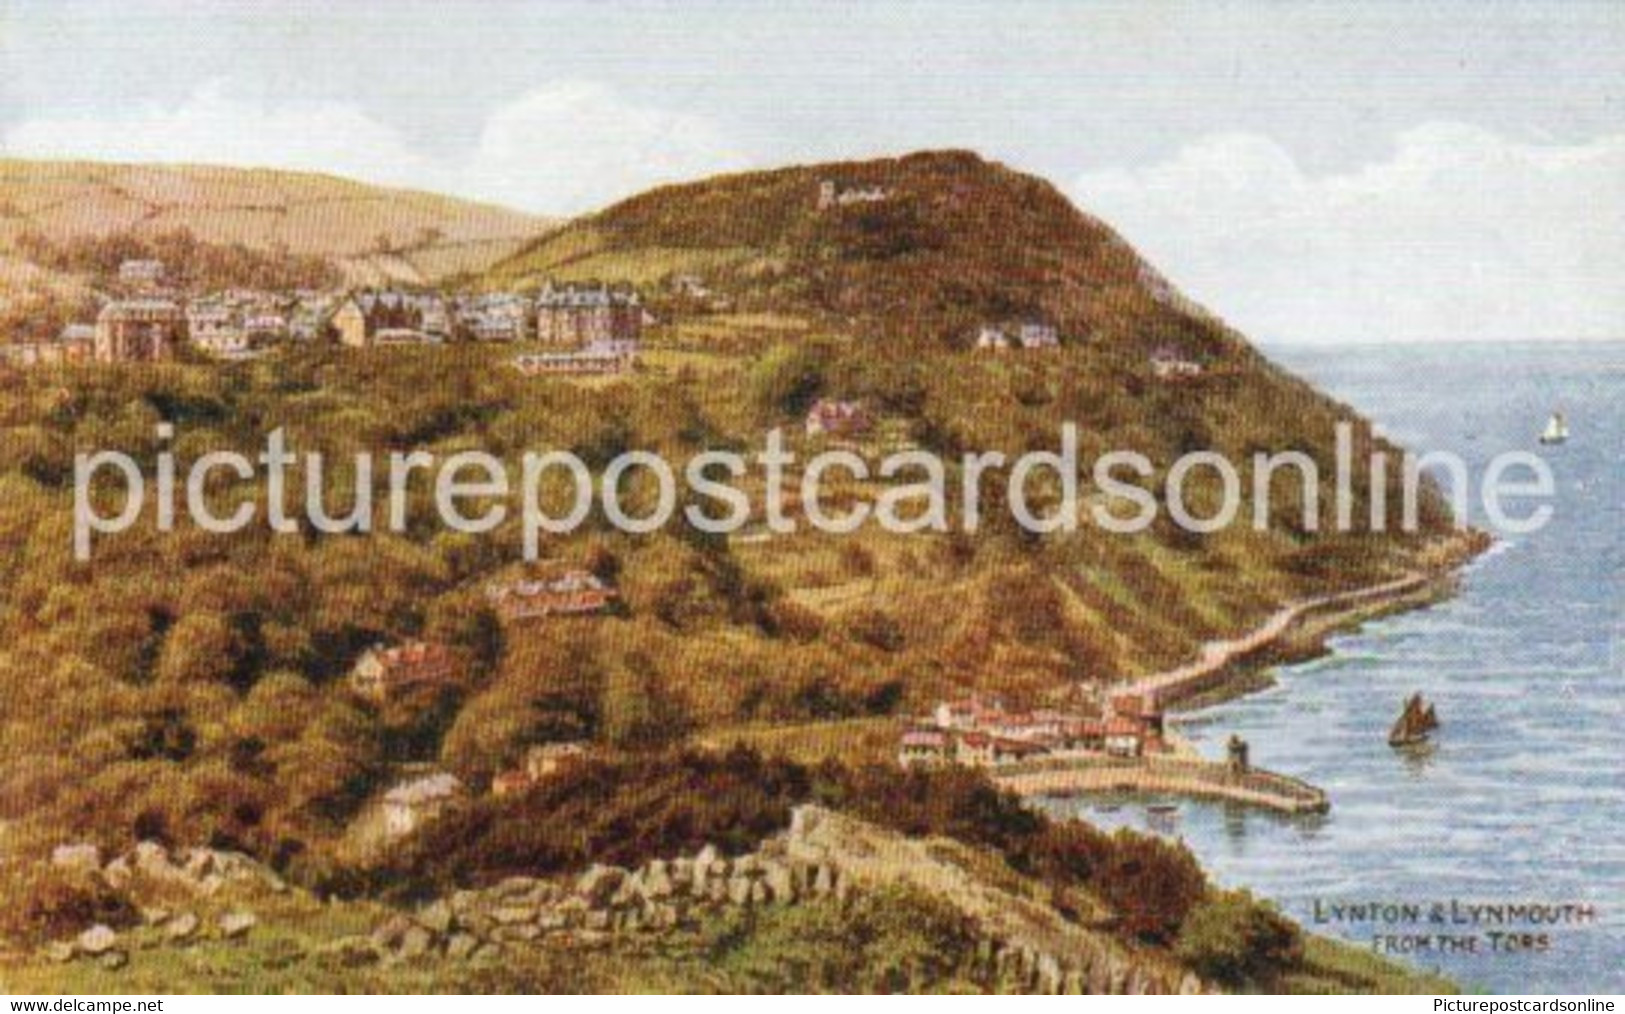 LYNTON AND LYNMOUTH FROM THE TORS OLD ART COLOUR POSTCARD BY A. R. QUINTON NO 3936 DEVON - Quinton, AR